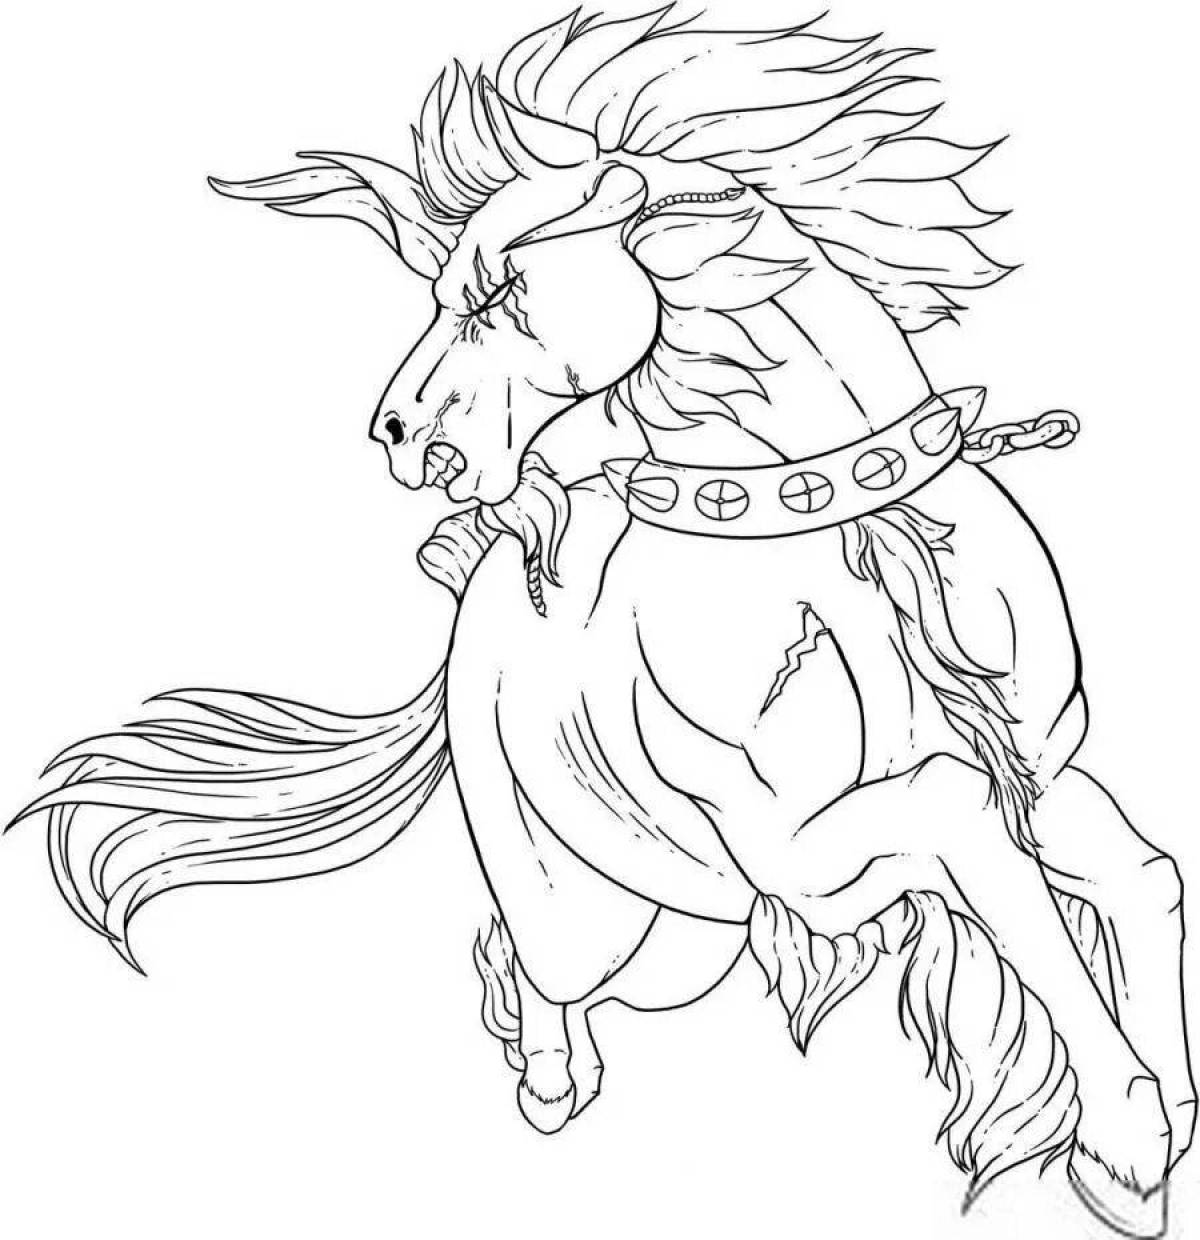 Impressive long horse monster coloring page